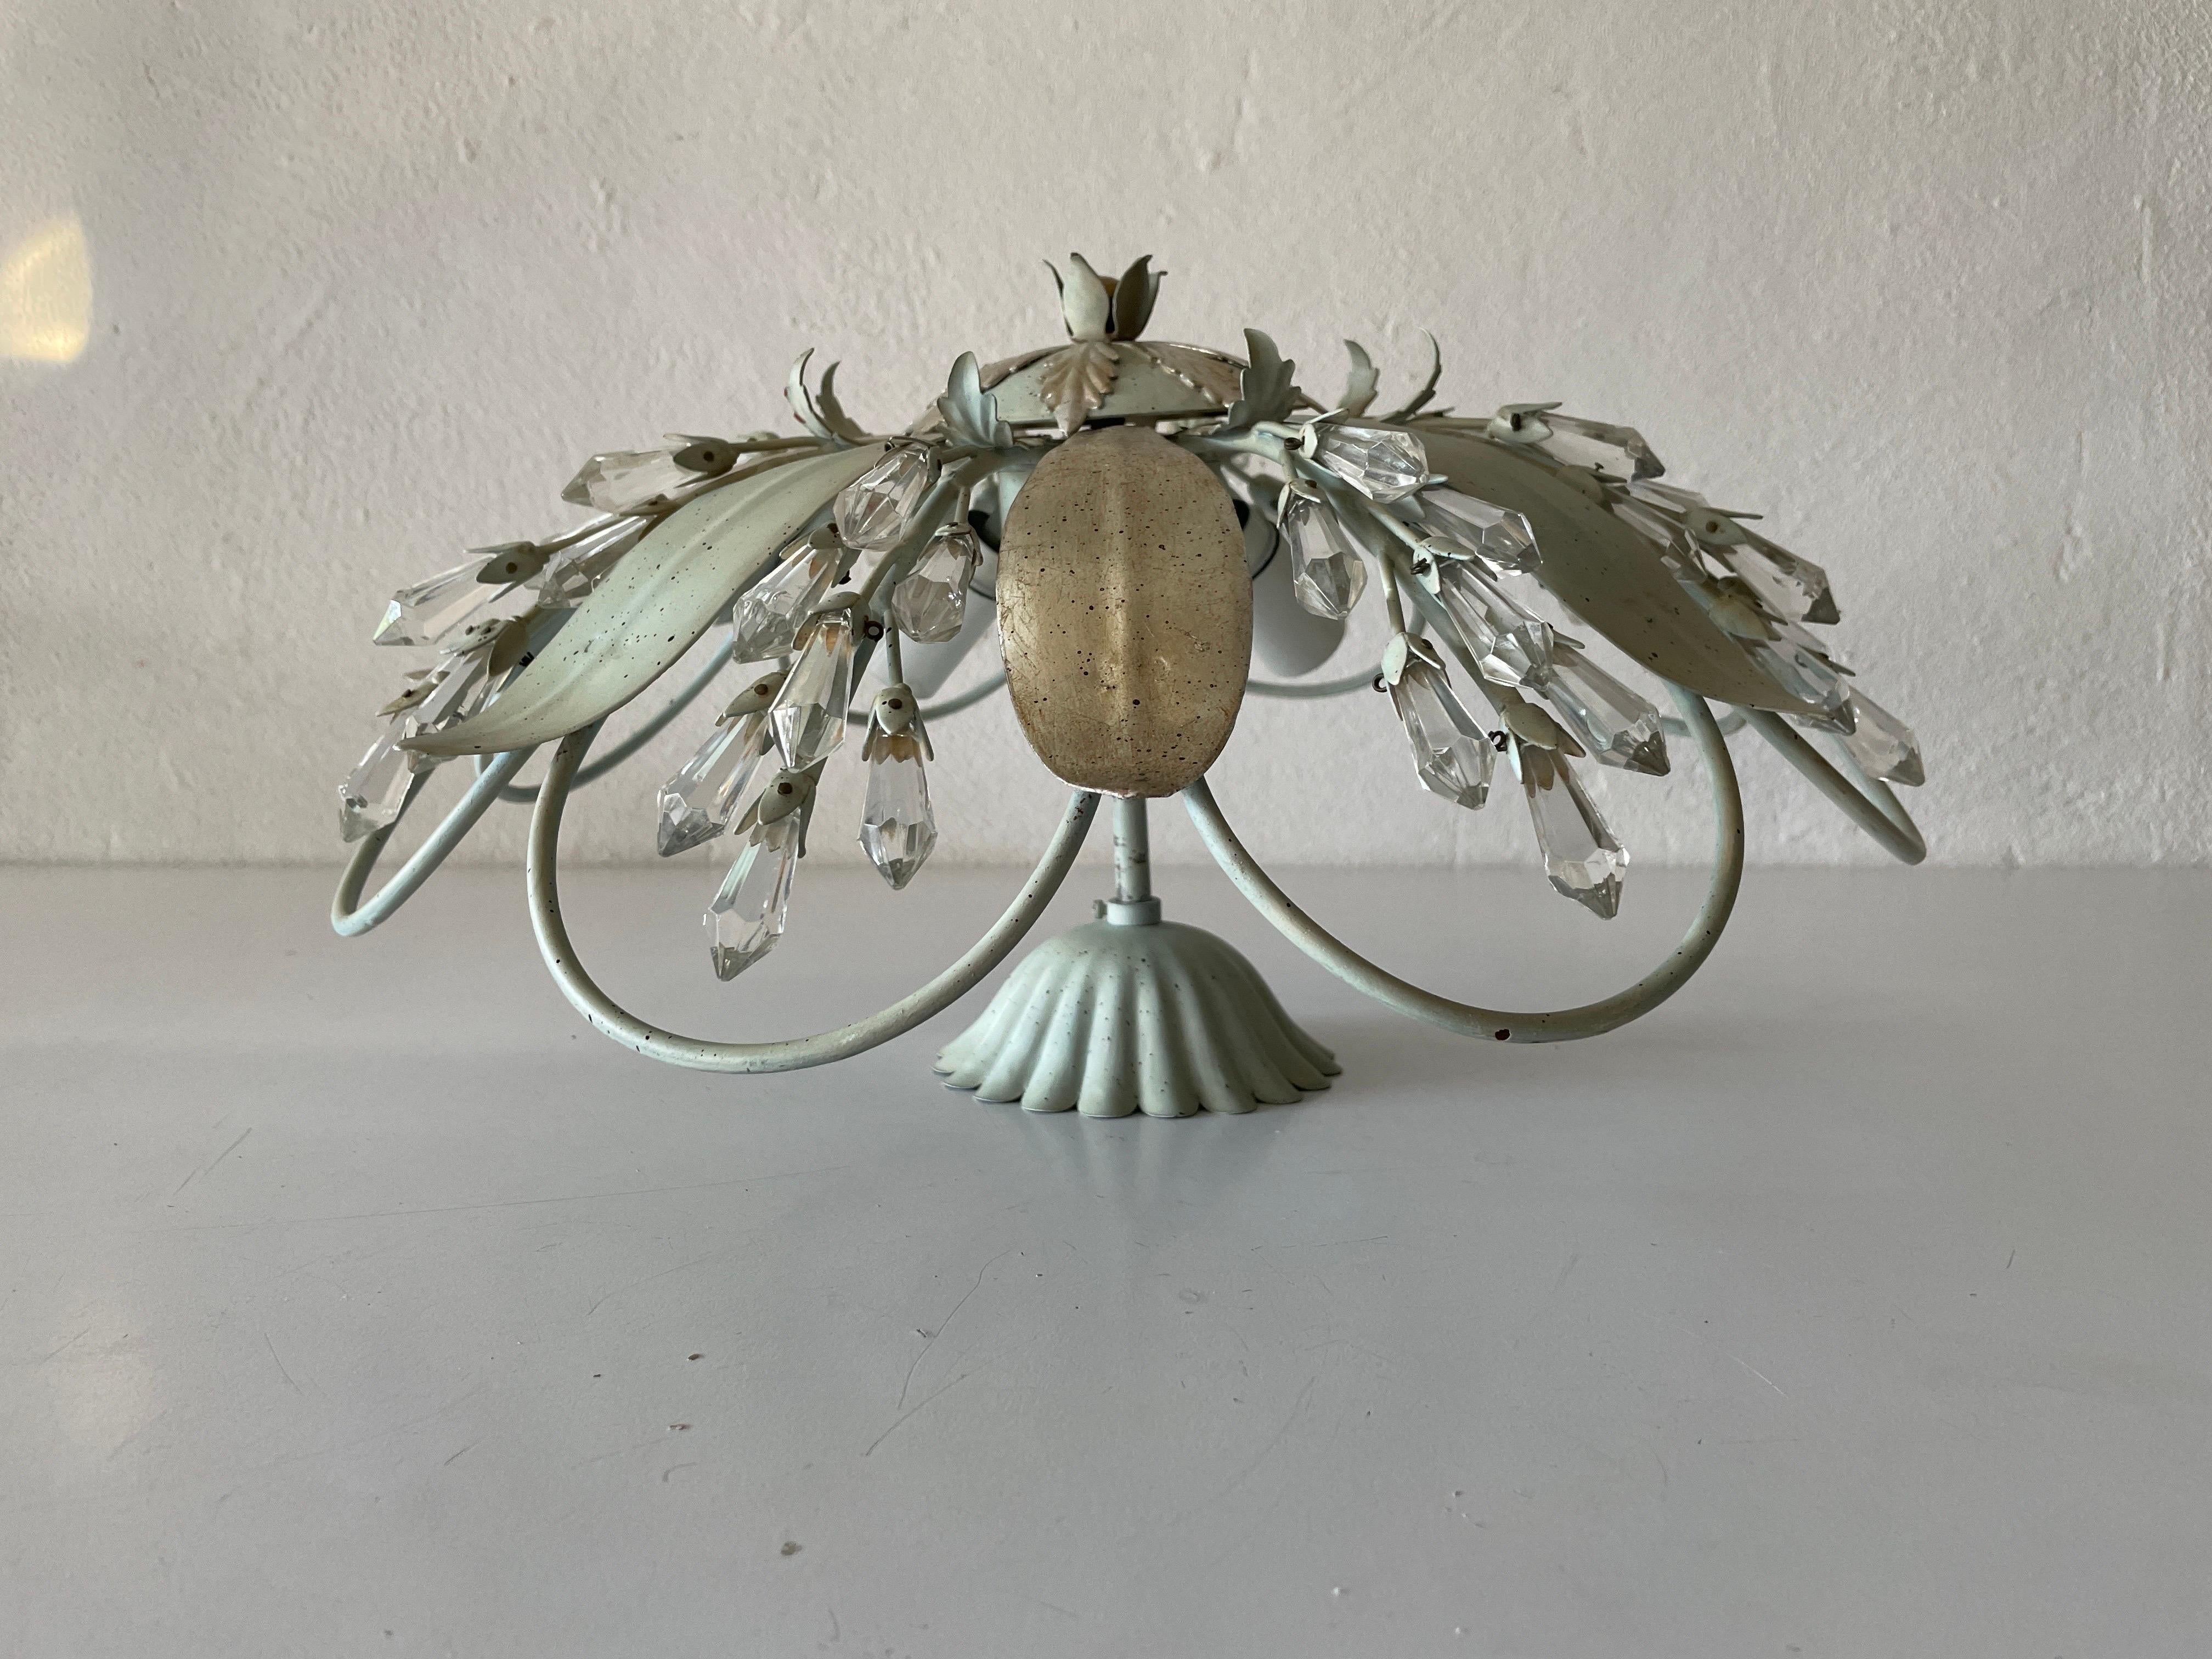 Flower Design Ceiling Lamp with Glass Ornaments, 1950s, Germany For Sale 2